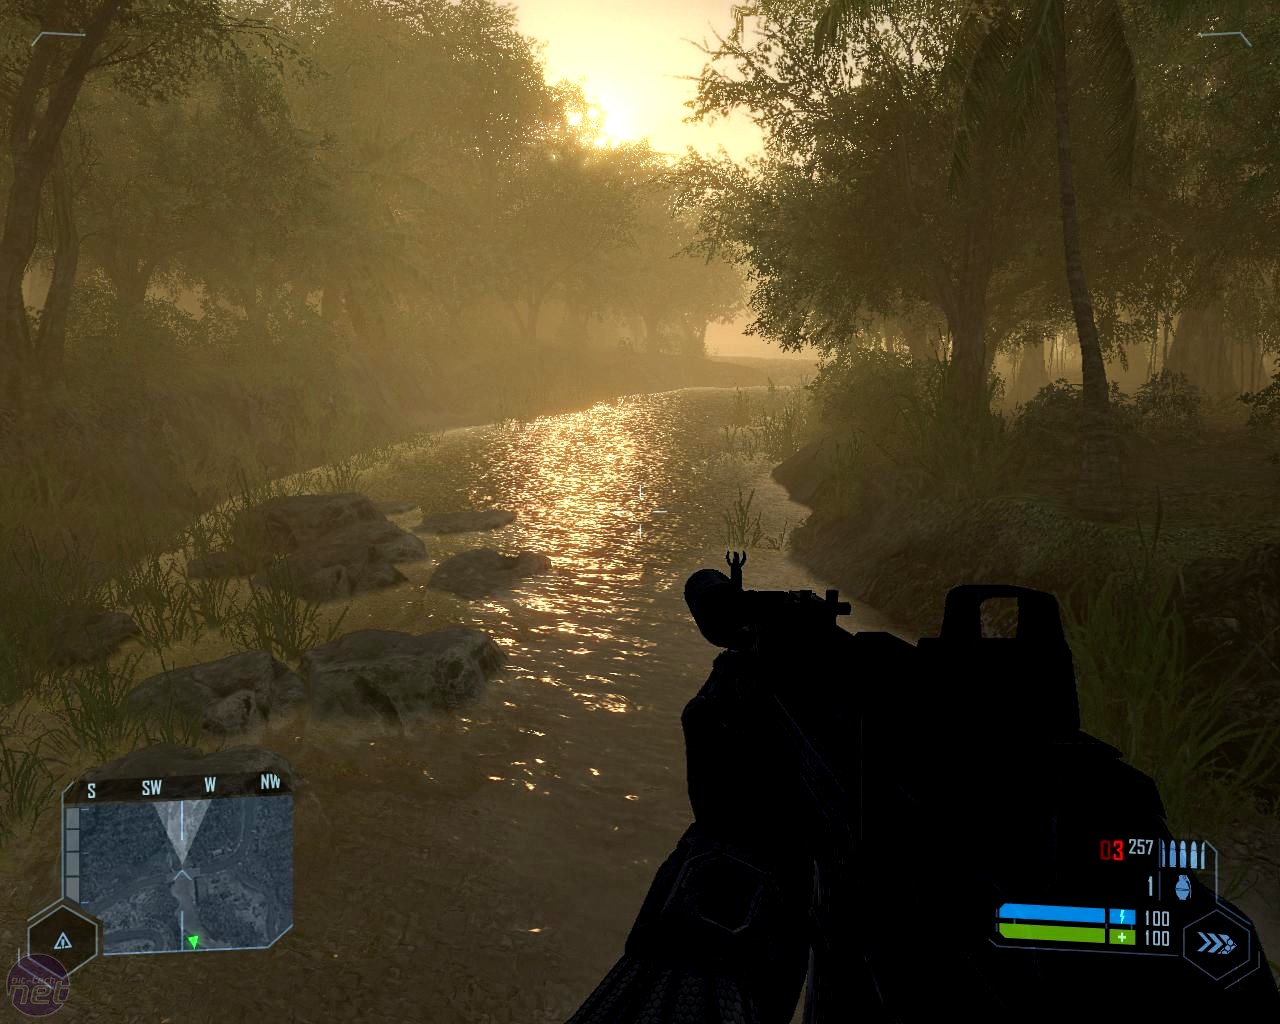 https://images.bit-tech.net/content_images/2007/11/crysis/bshaderv.jpg